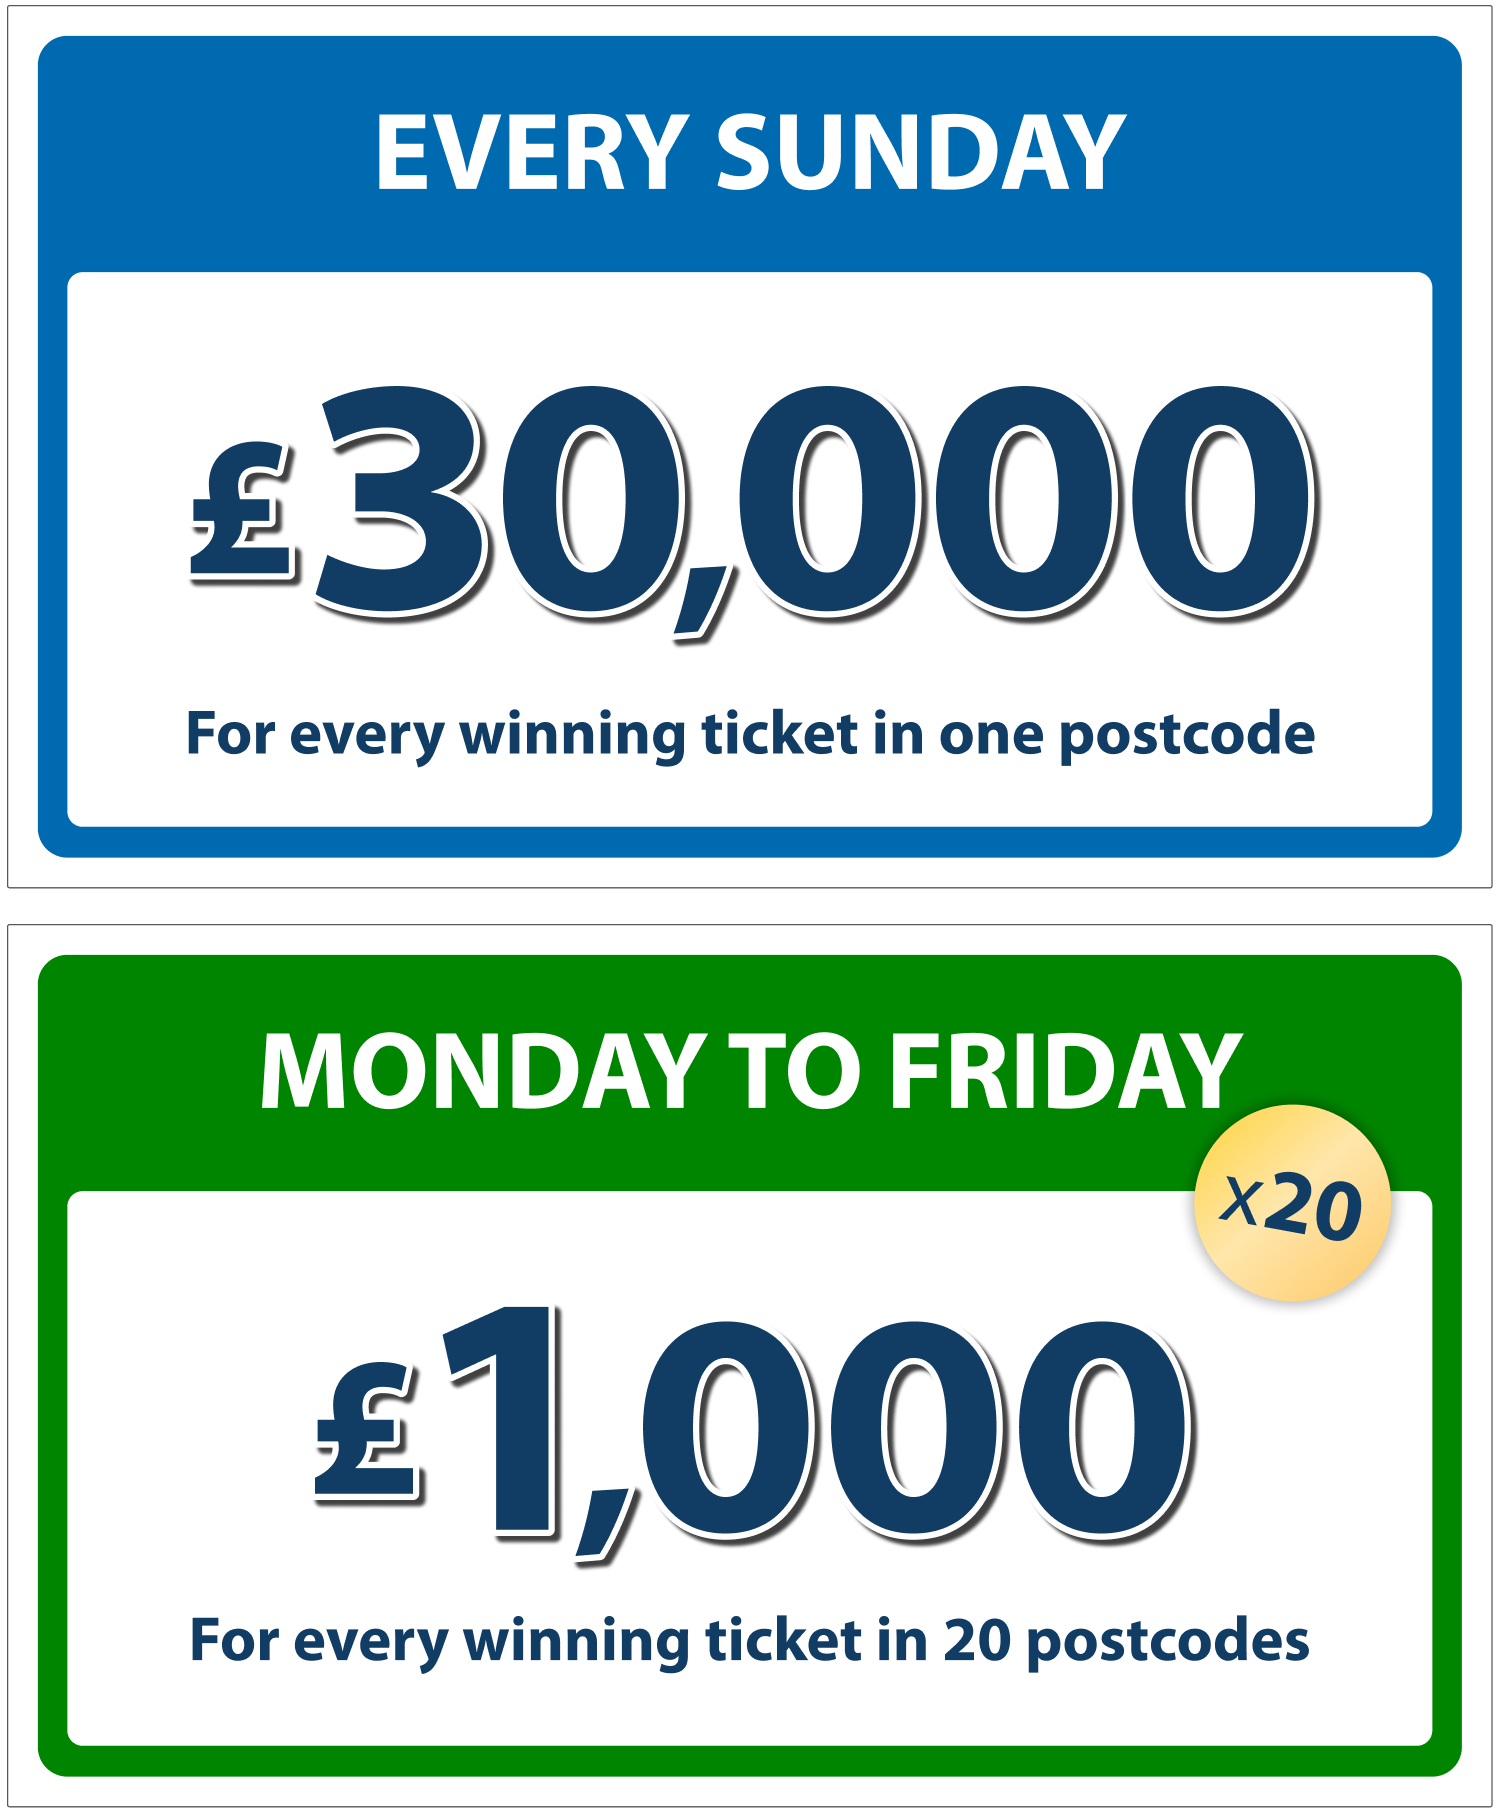 Every Sunday £30,000 is won by every winning ticket in one postcode and Monday to Friday £1,000 is won by every winning ticket in 20 postcodes